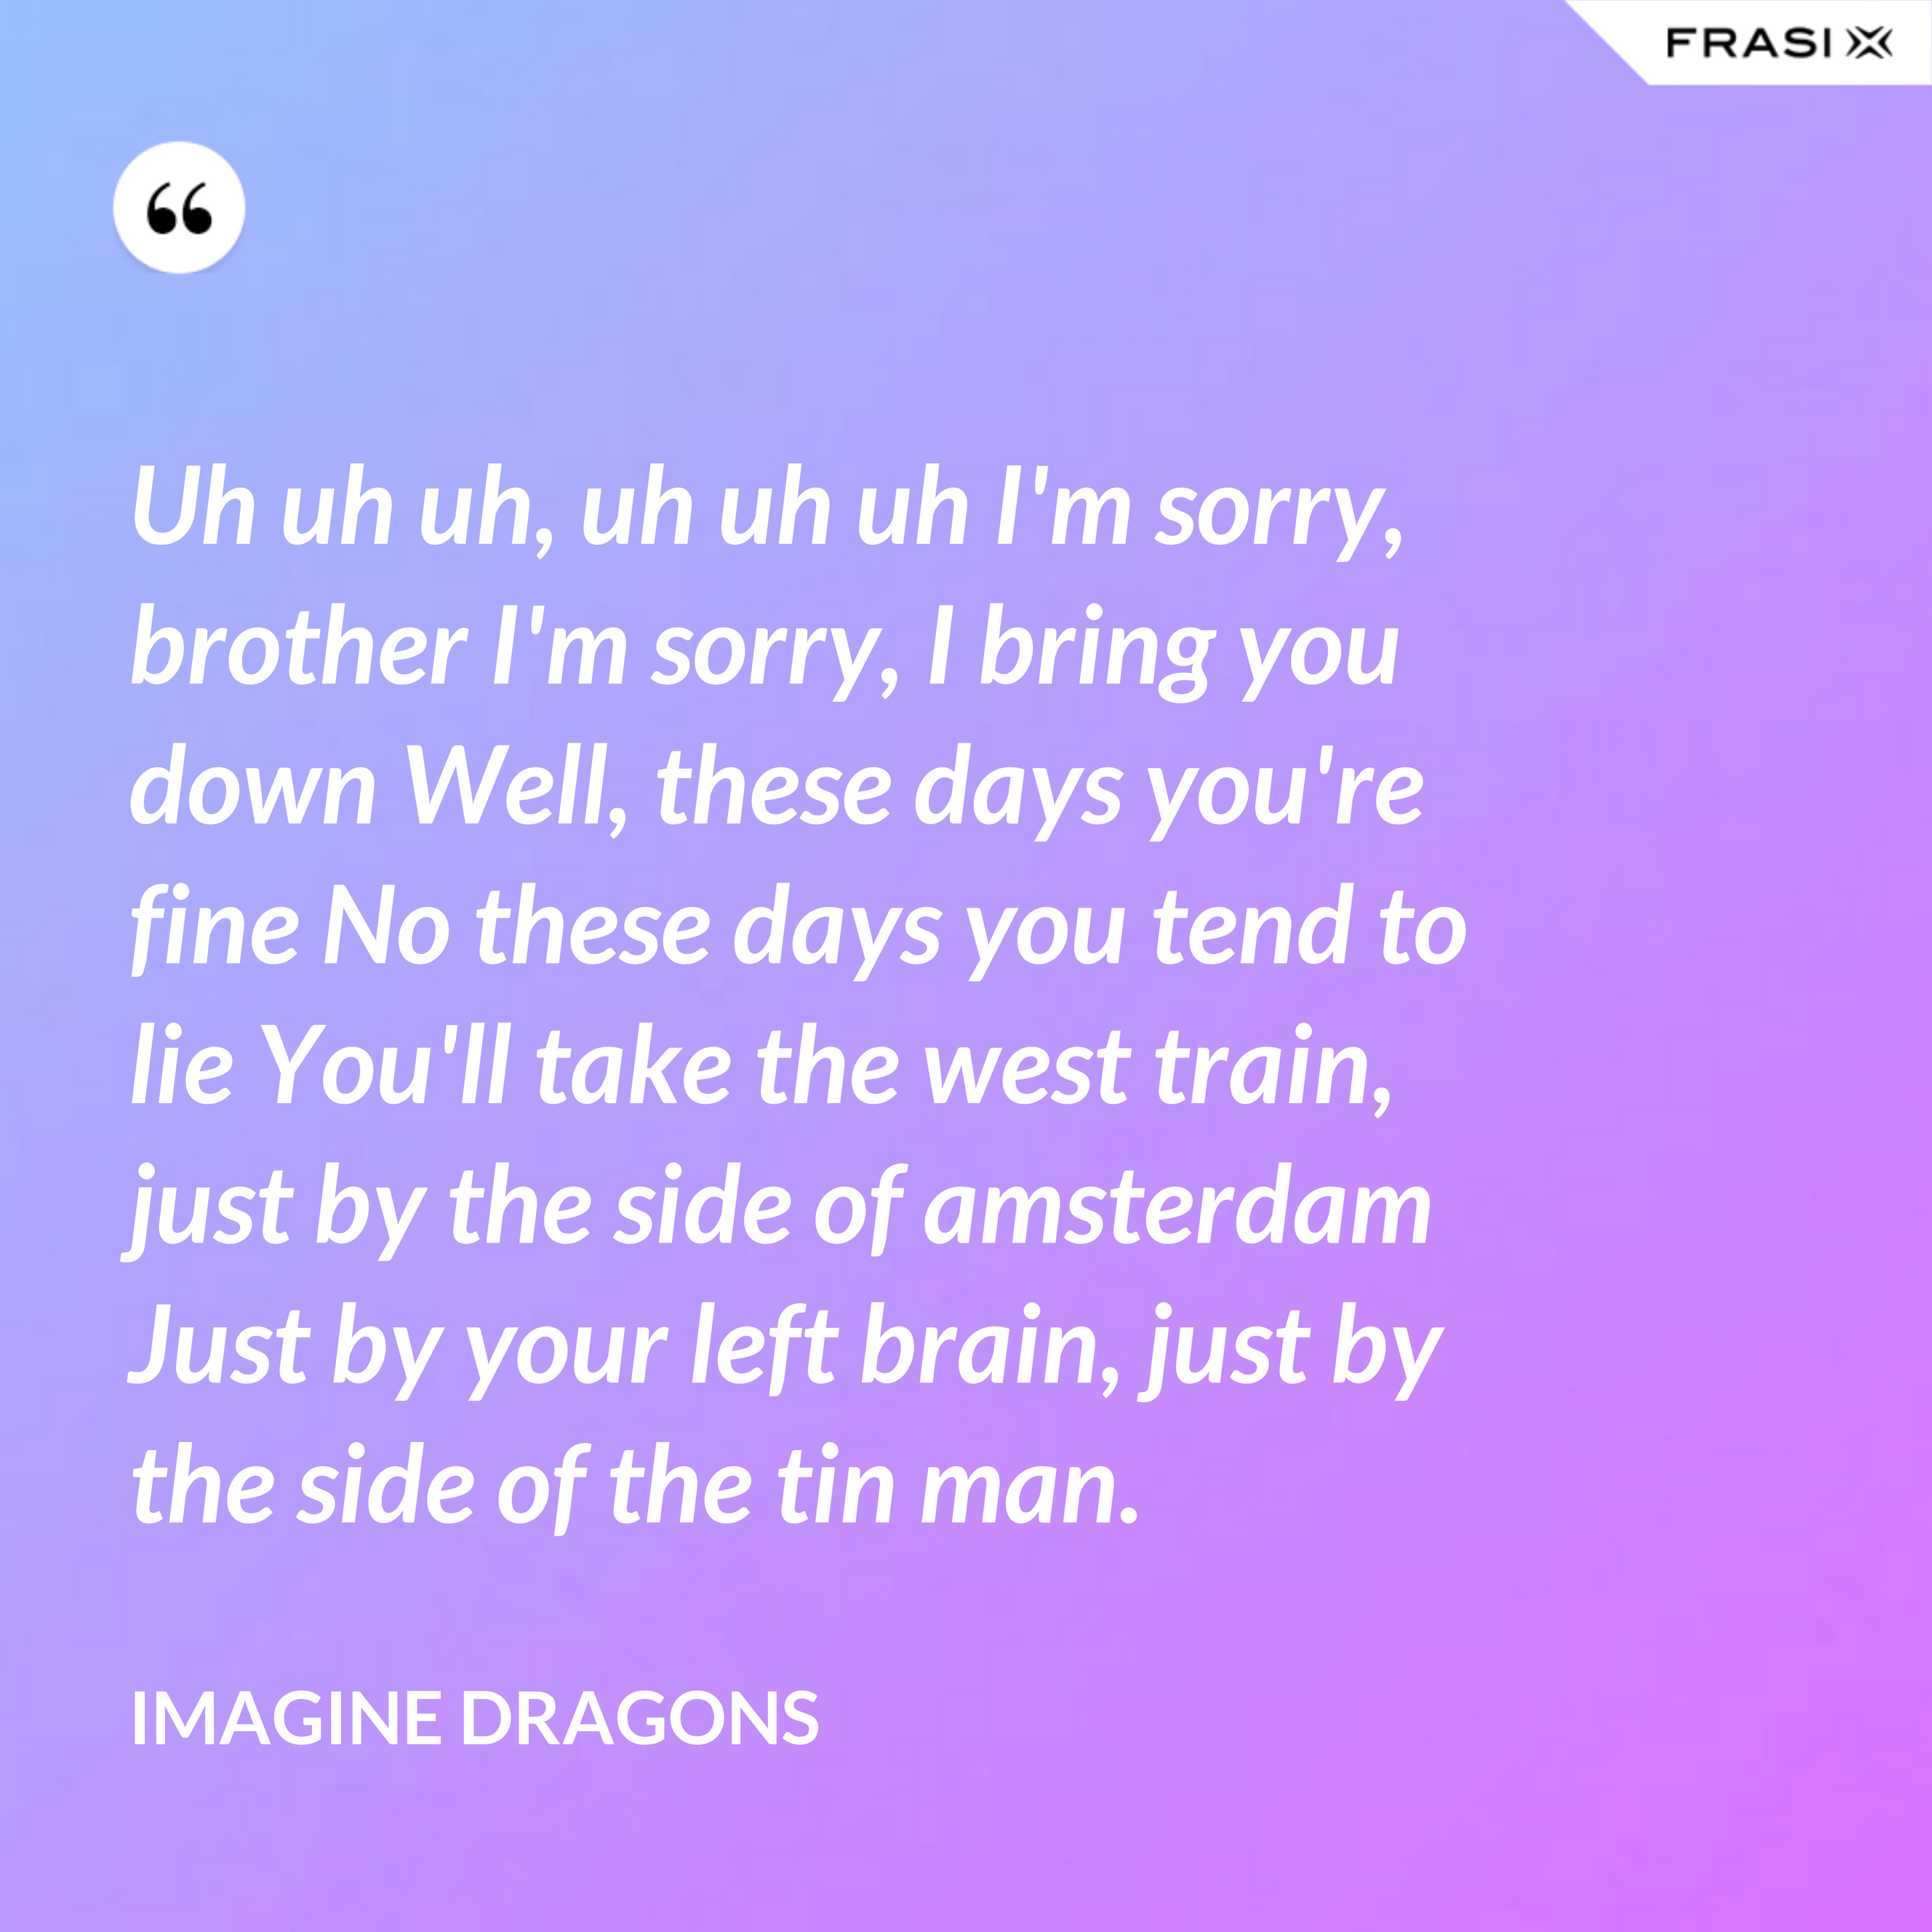 Uh uh uh, uh uh uh I'm sorry, brother I'm sorry, I bring you down Well, these days you're fine No these days you tend to lie You'll take the west train, just by the side of amsterdam Just by your left brain, just by the side of the tin man. - Imagine Dragons